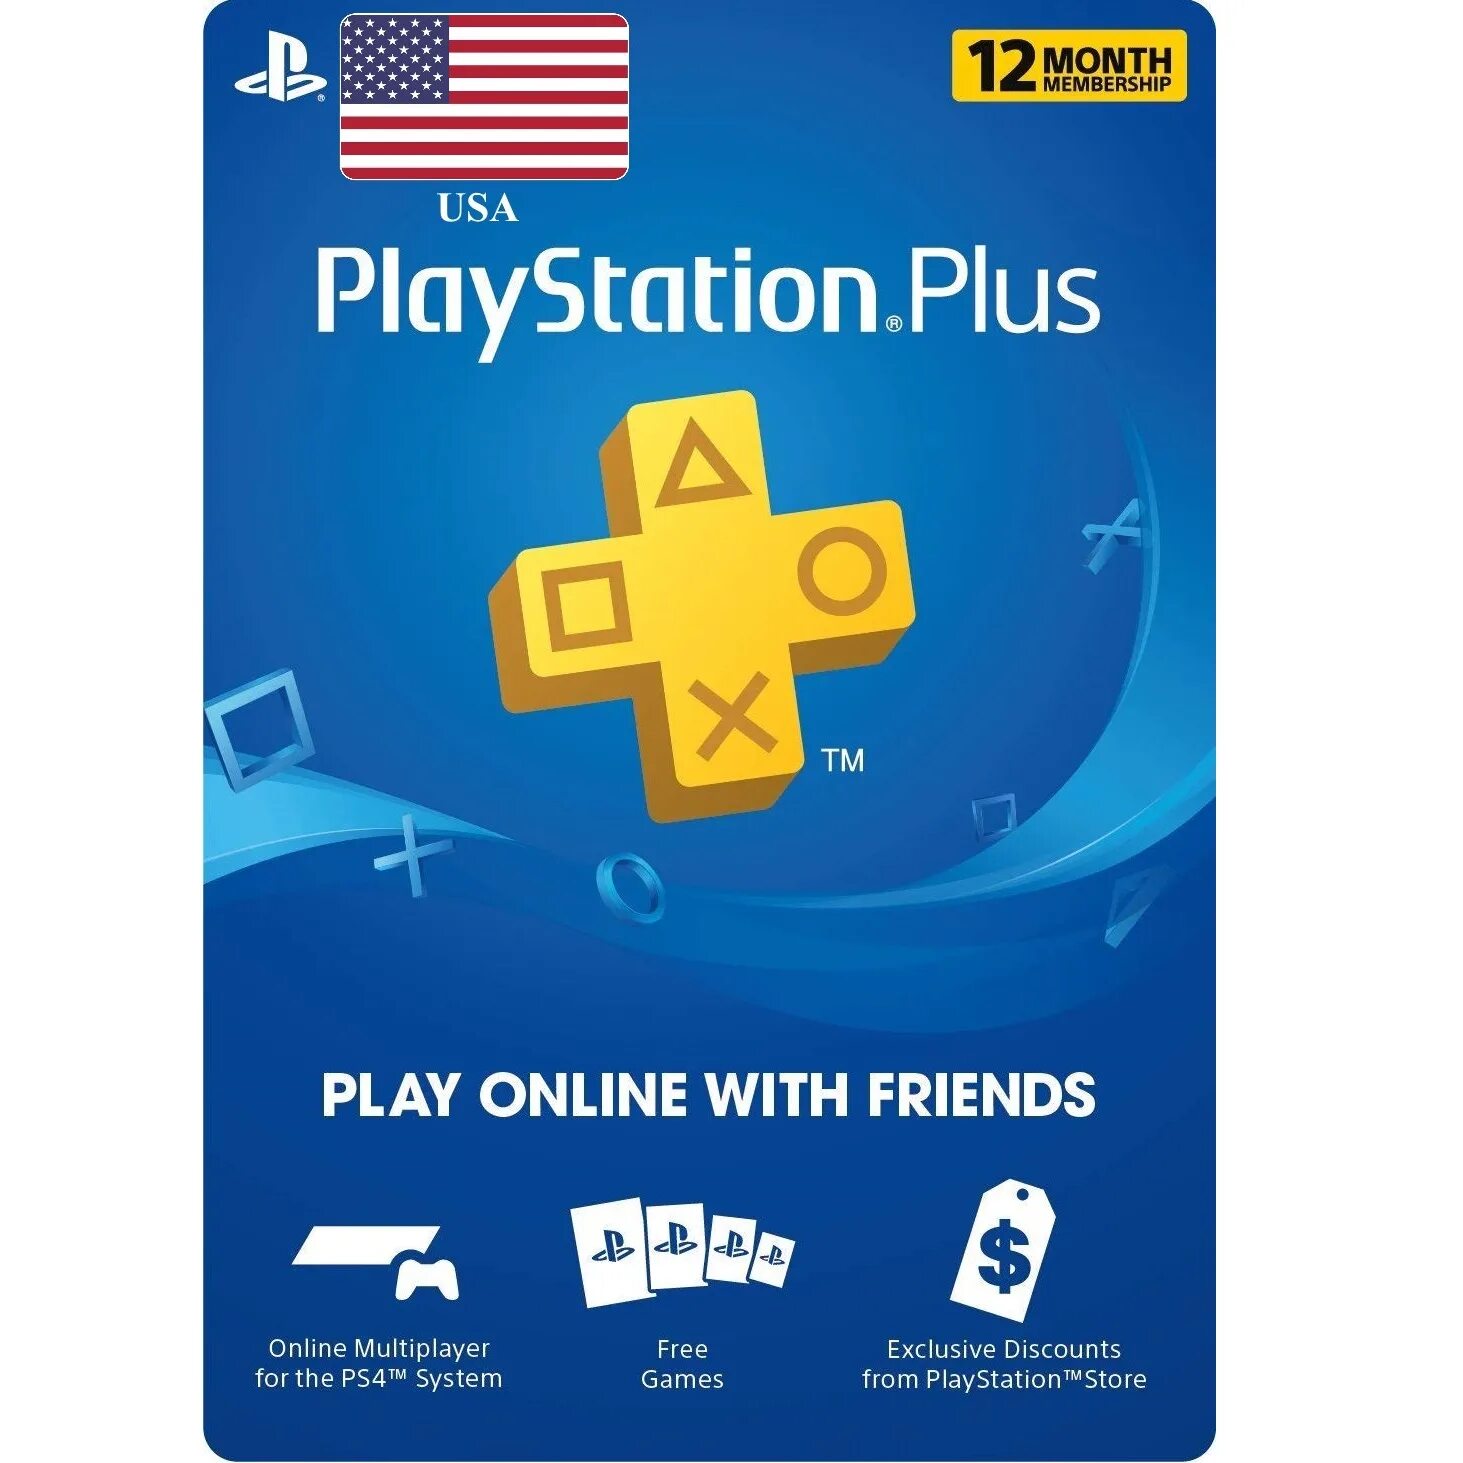 Подписка Sony PLAYSTATION Plus. PLAYSTATION Plus Extra Essential Premium Deluxe. PS Plus 3months. Подписка PS Plus на 12 месяцев Делюкс. Playstation store turkey ps plus